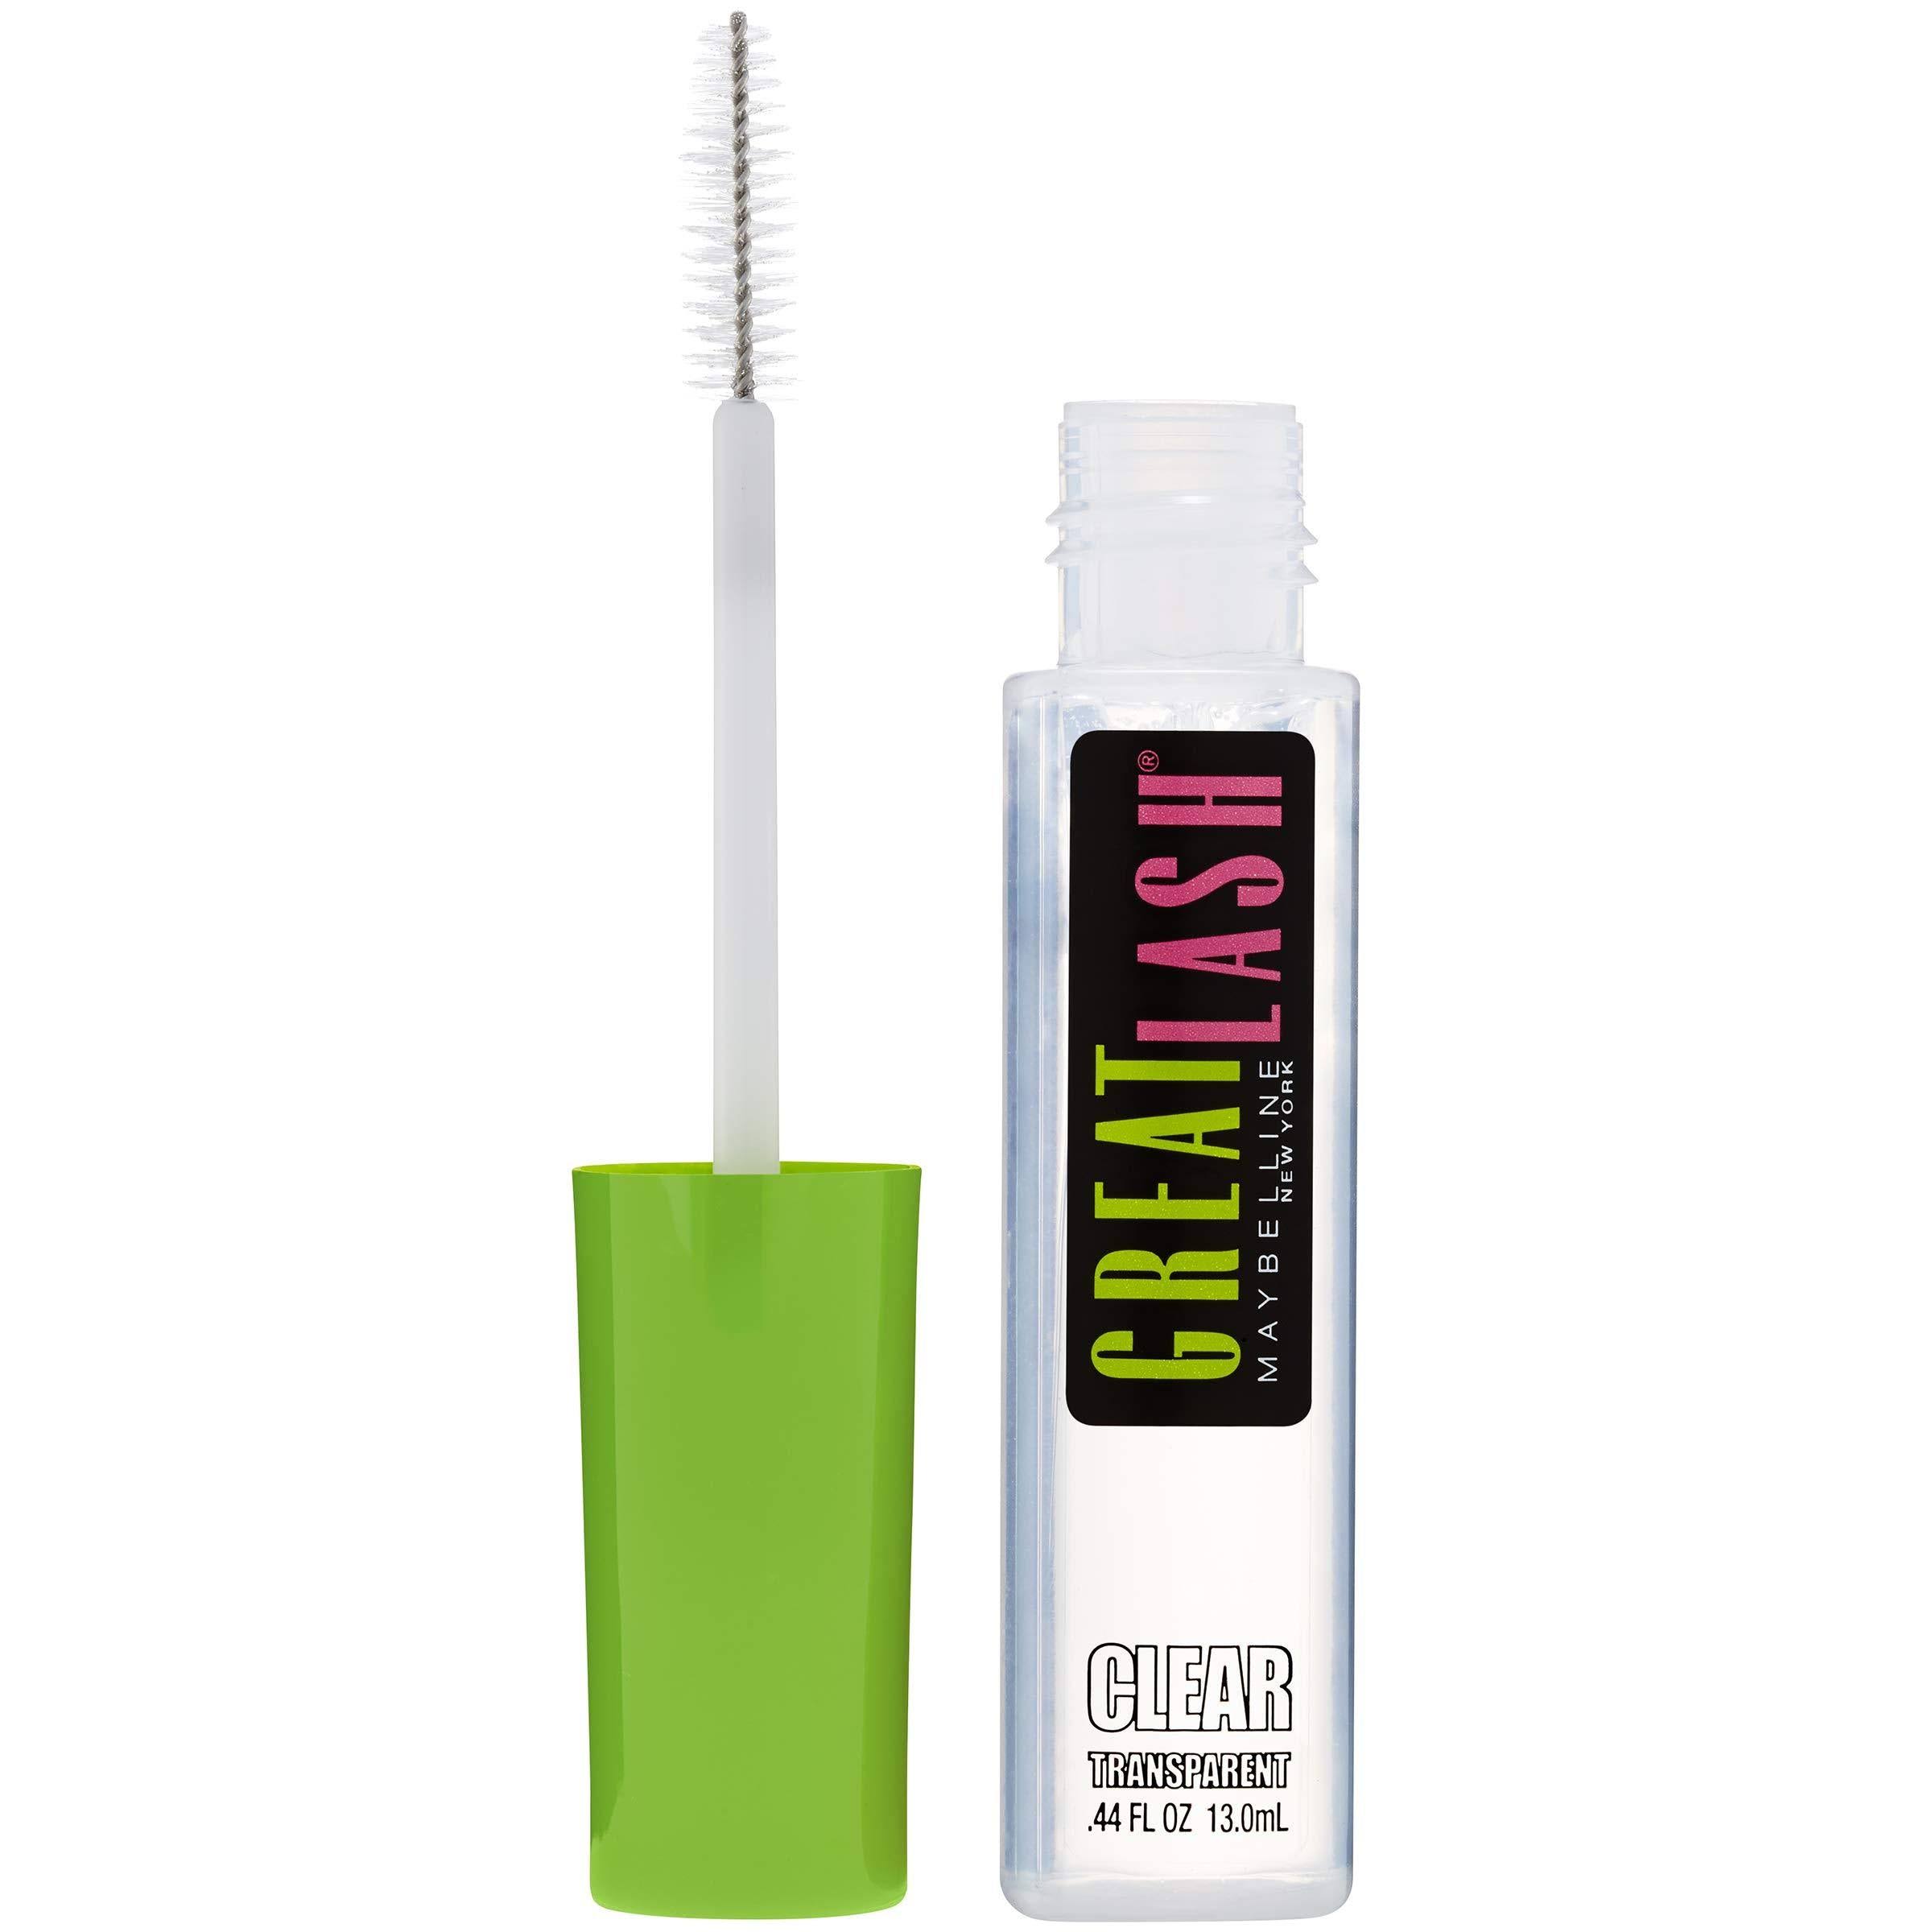 Maybelline Great Transparent Mascara - 110 Clear